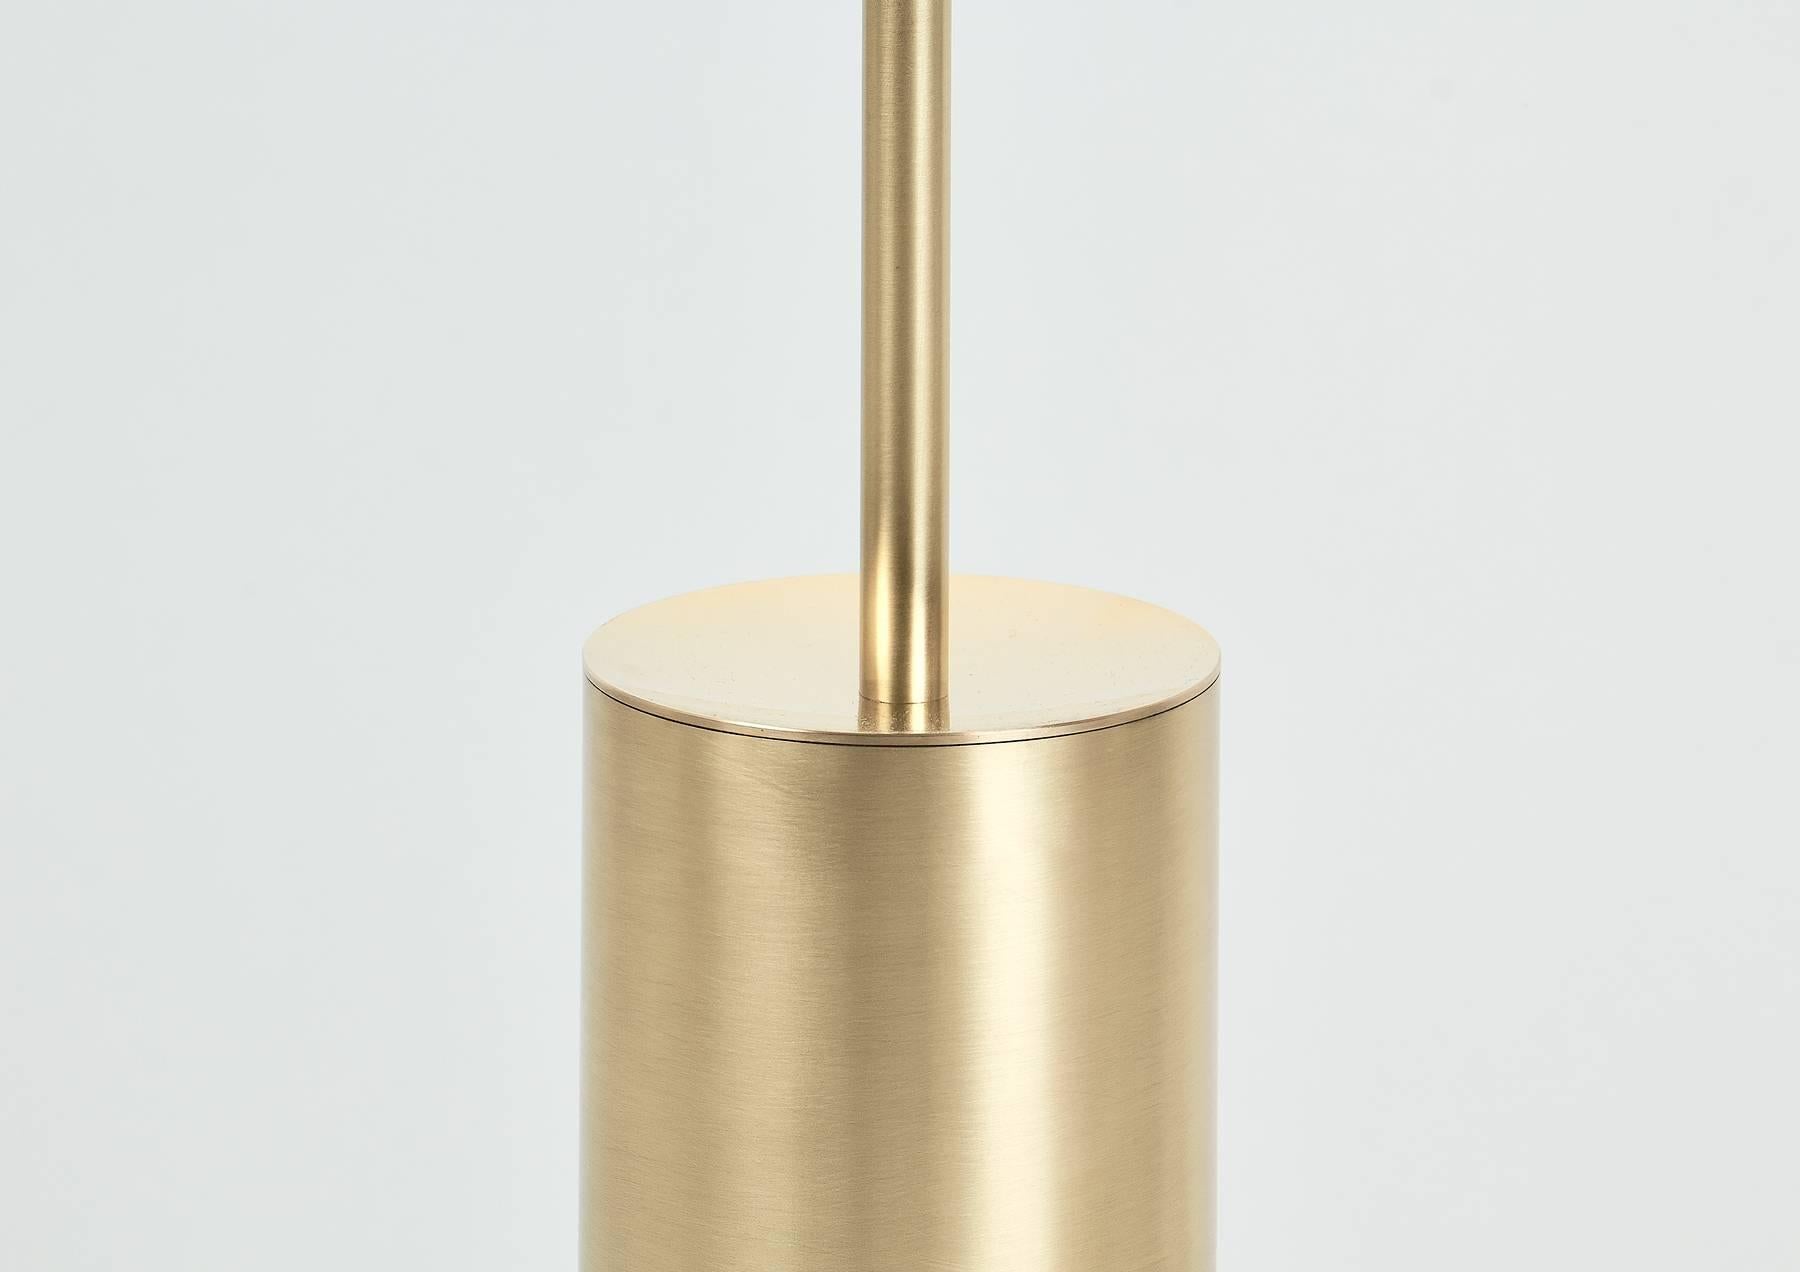 Mickey Minimal Sculptural Floor Lamp Dimmable Touch Sensor Brushed Brass, Glass In New Condition For Sale In Reggio Emilia, IT